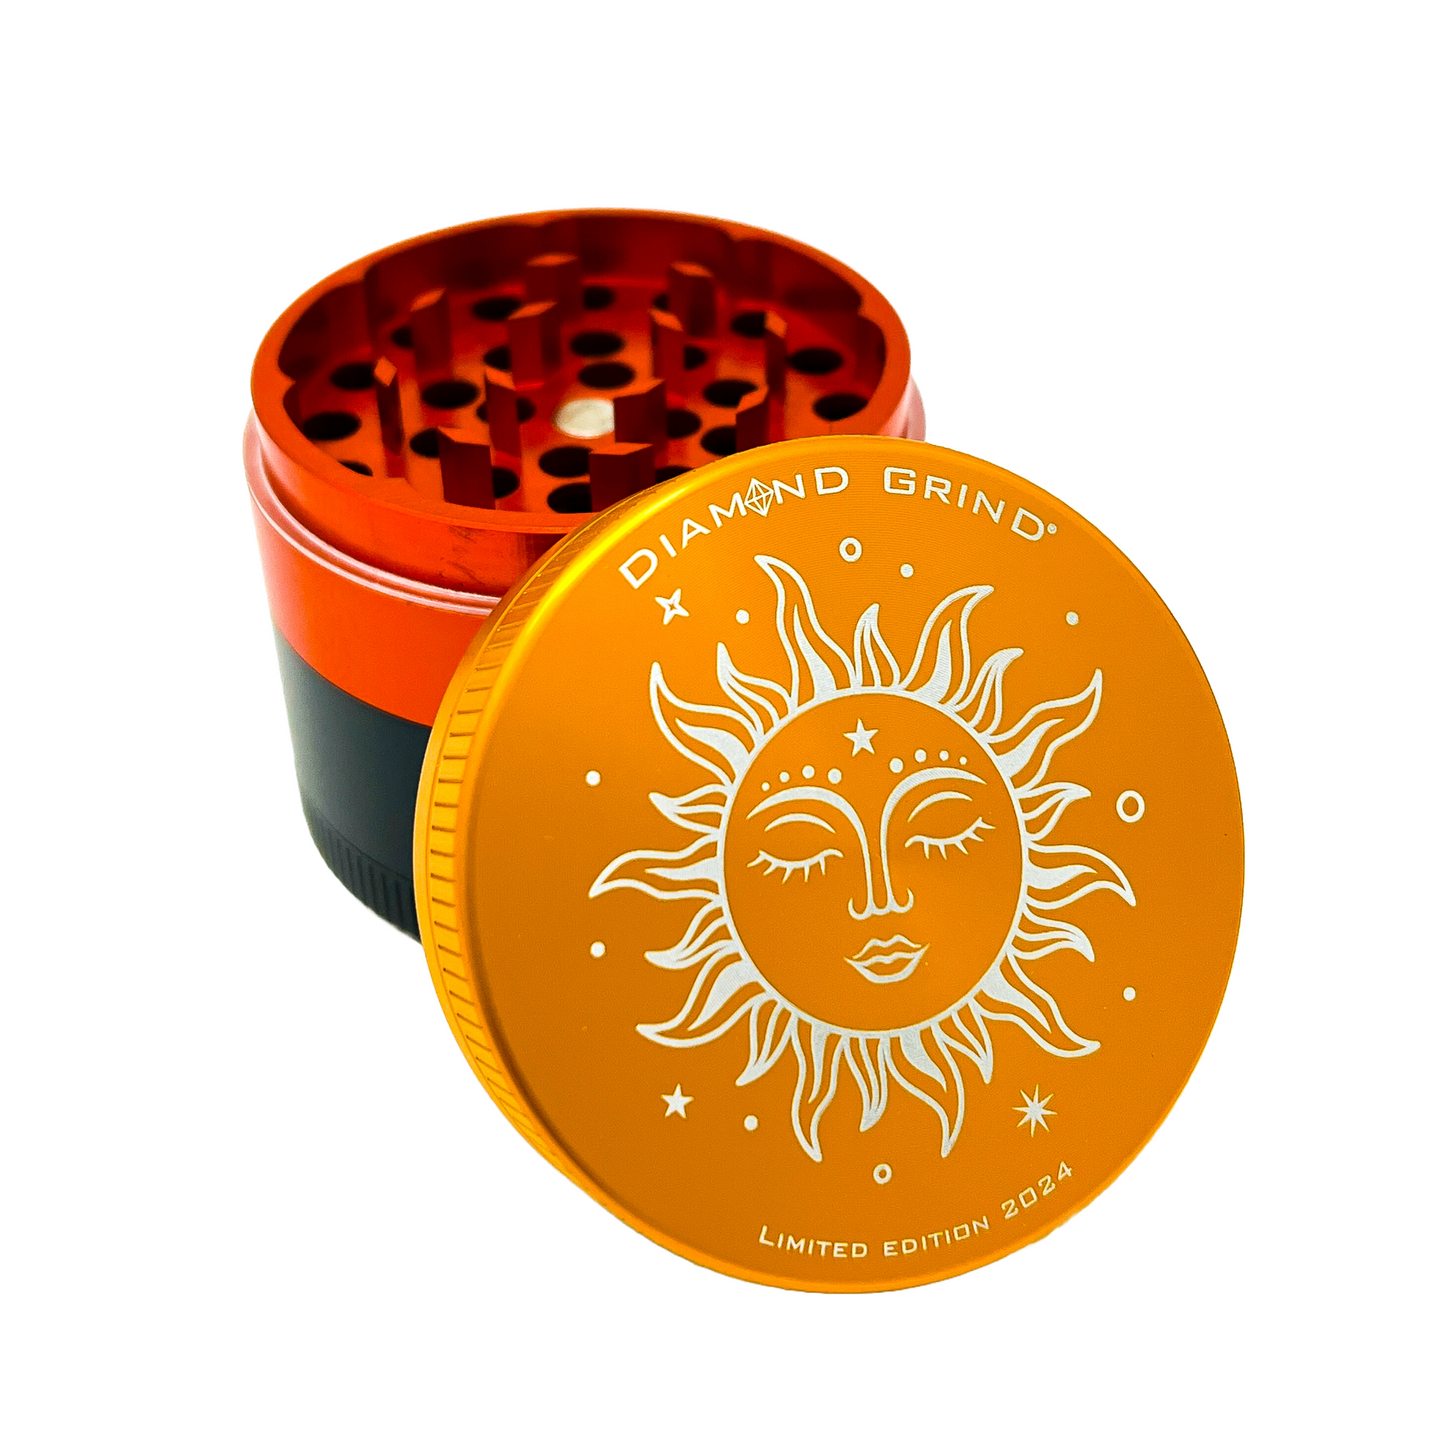 Diamond Grind Limited Edition Herb Grinder 56mm - 6th batch, numbered